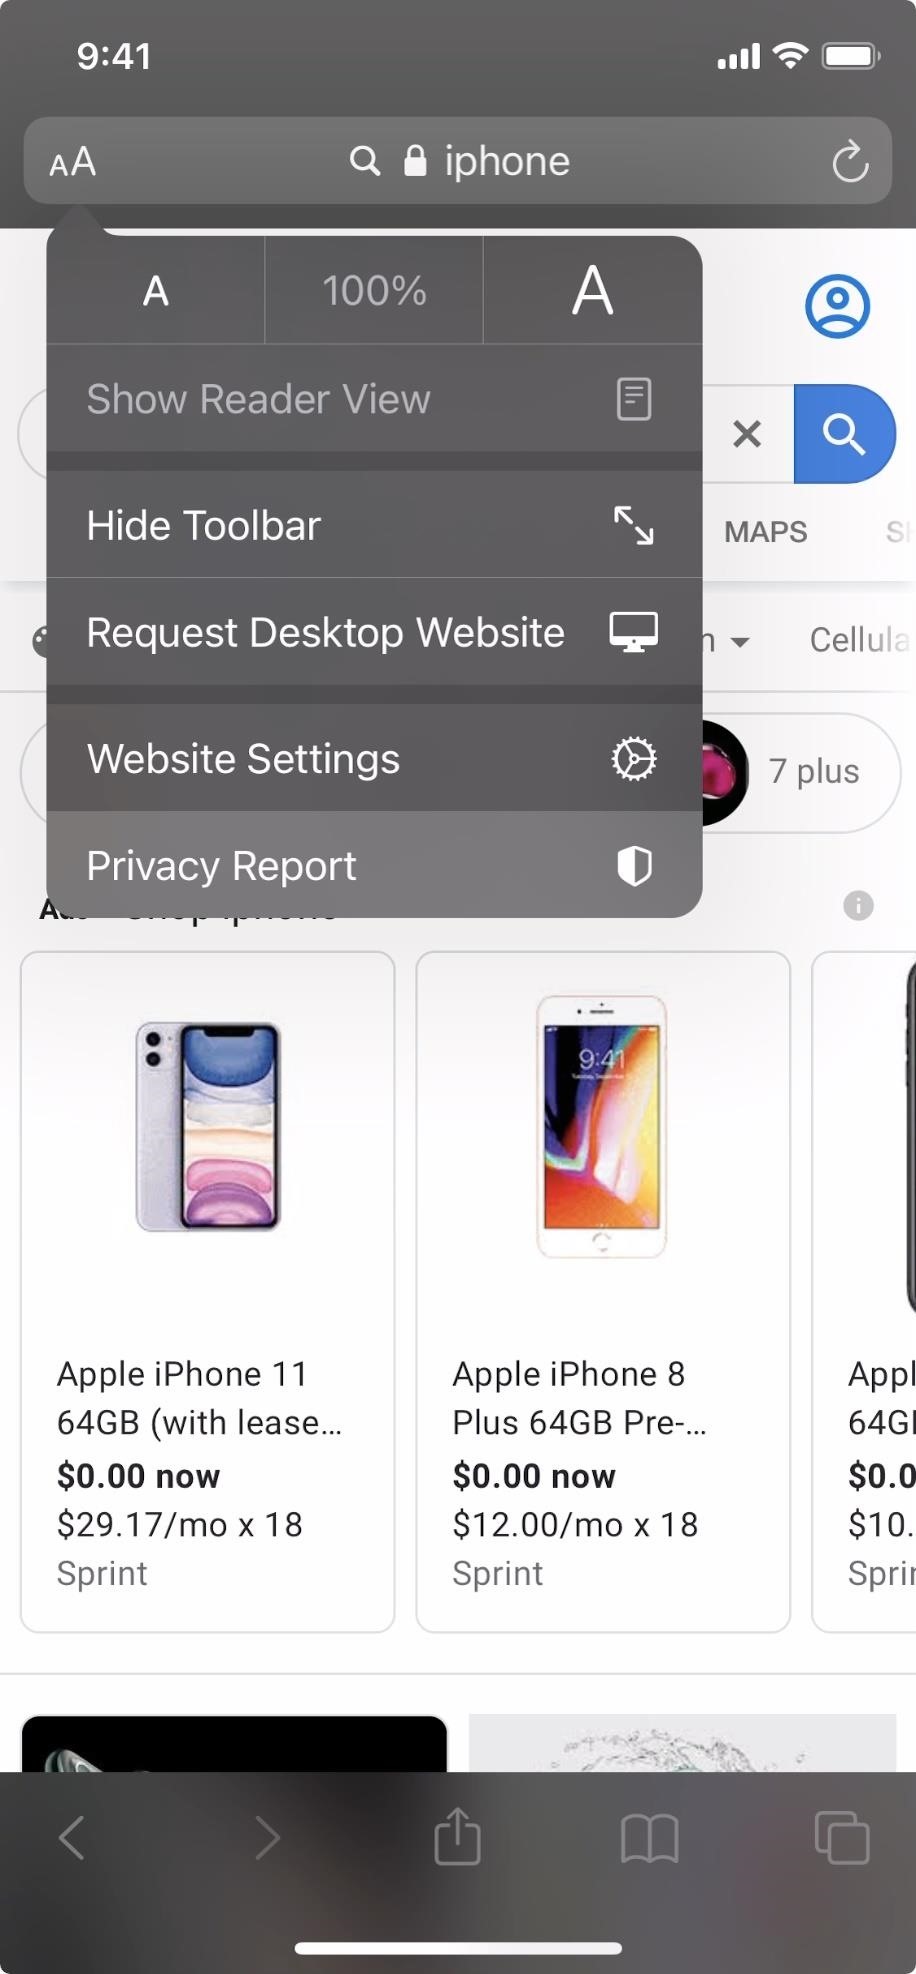 Apple's iOS 14 Developer Beta 2 for iPhone Introduces System-Wide UI Changes, Haptic Feedback Music Controls & More